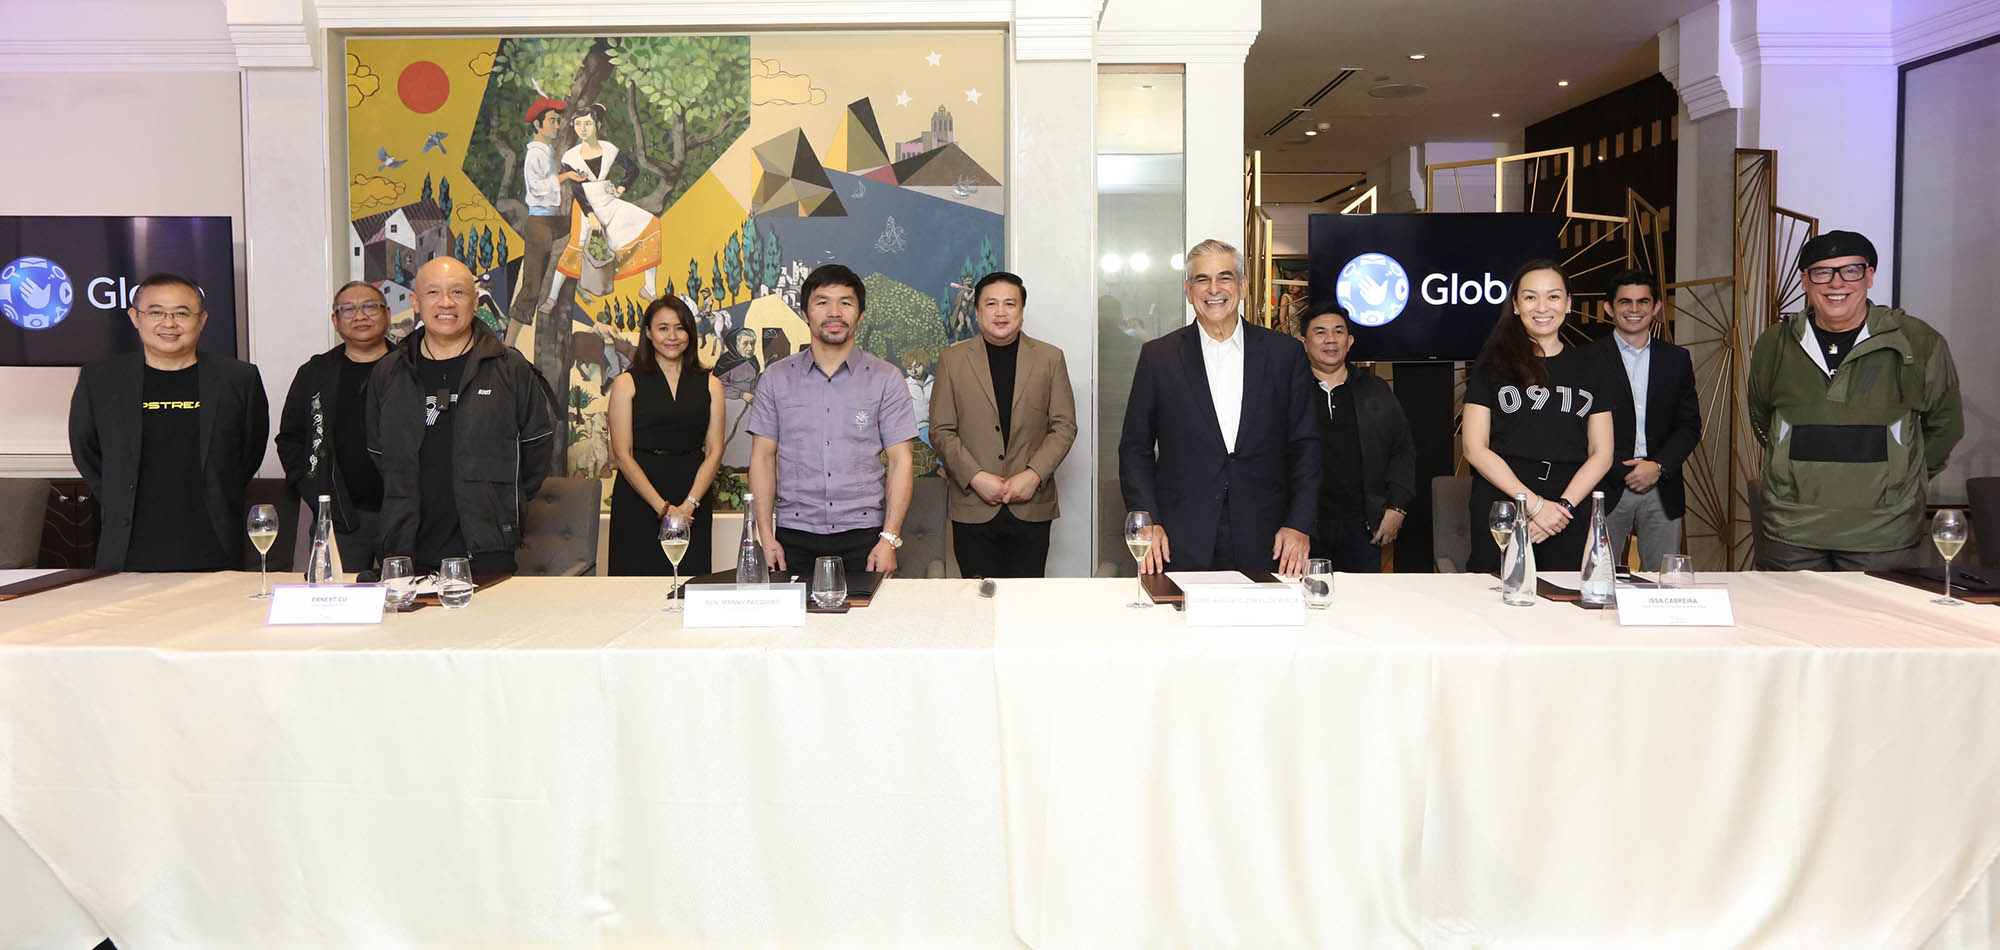 People’s Champ Pacquiao donates Globe endorsement fee to Rolly and Ulysses victims